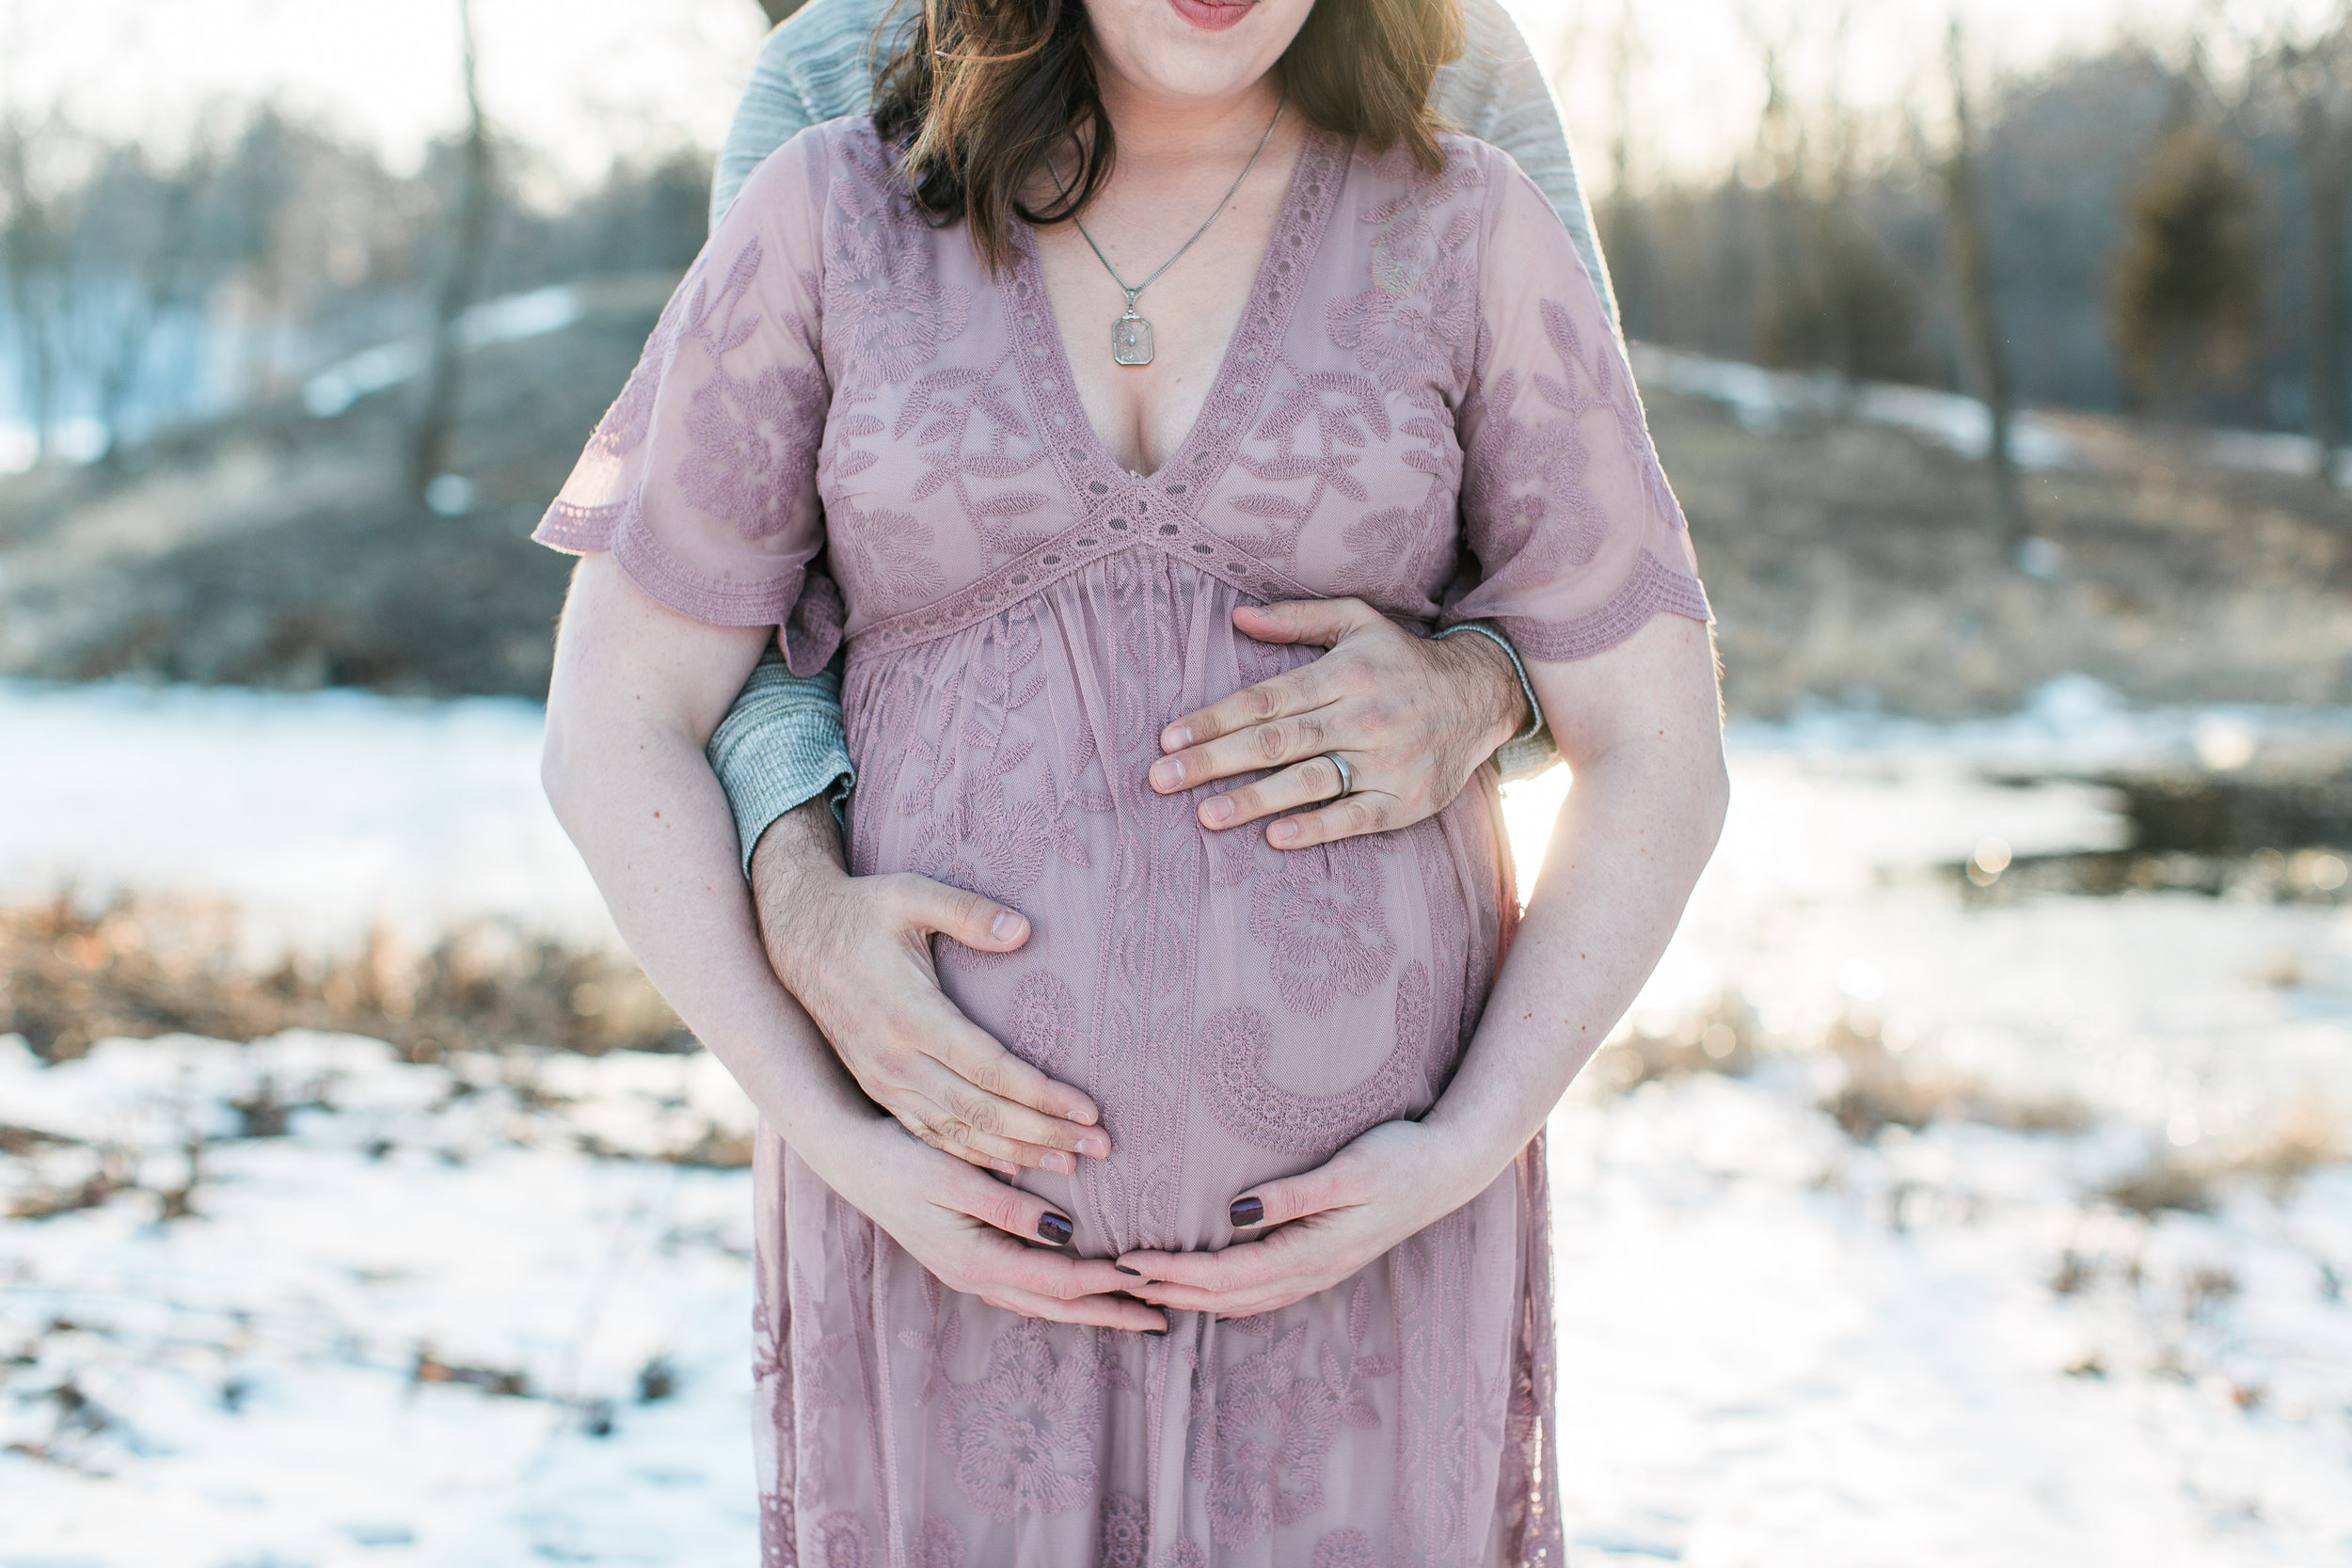 Expecting mother holding pregnant belly in pink lace dress in winter maternity photos Minnesota maternity photographer Mallory Kiesow Photography